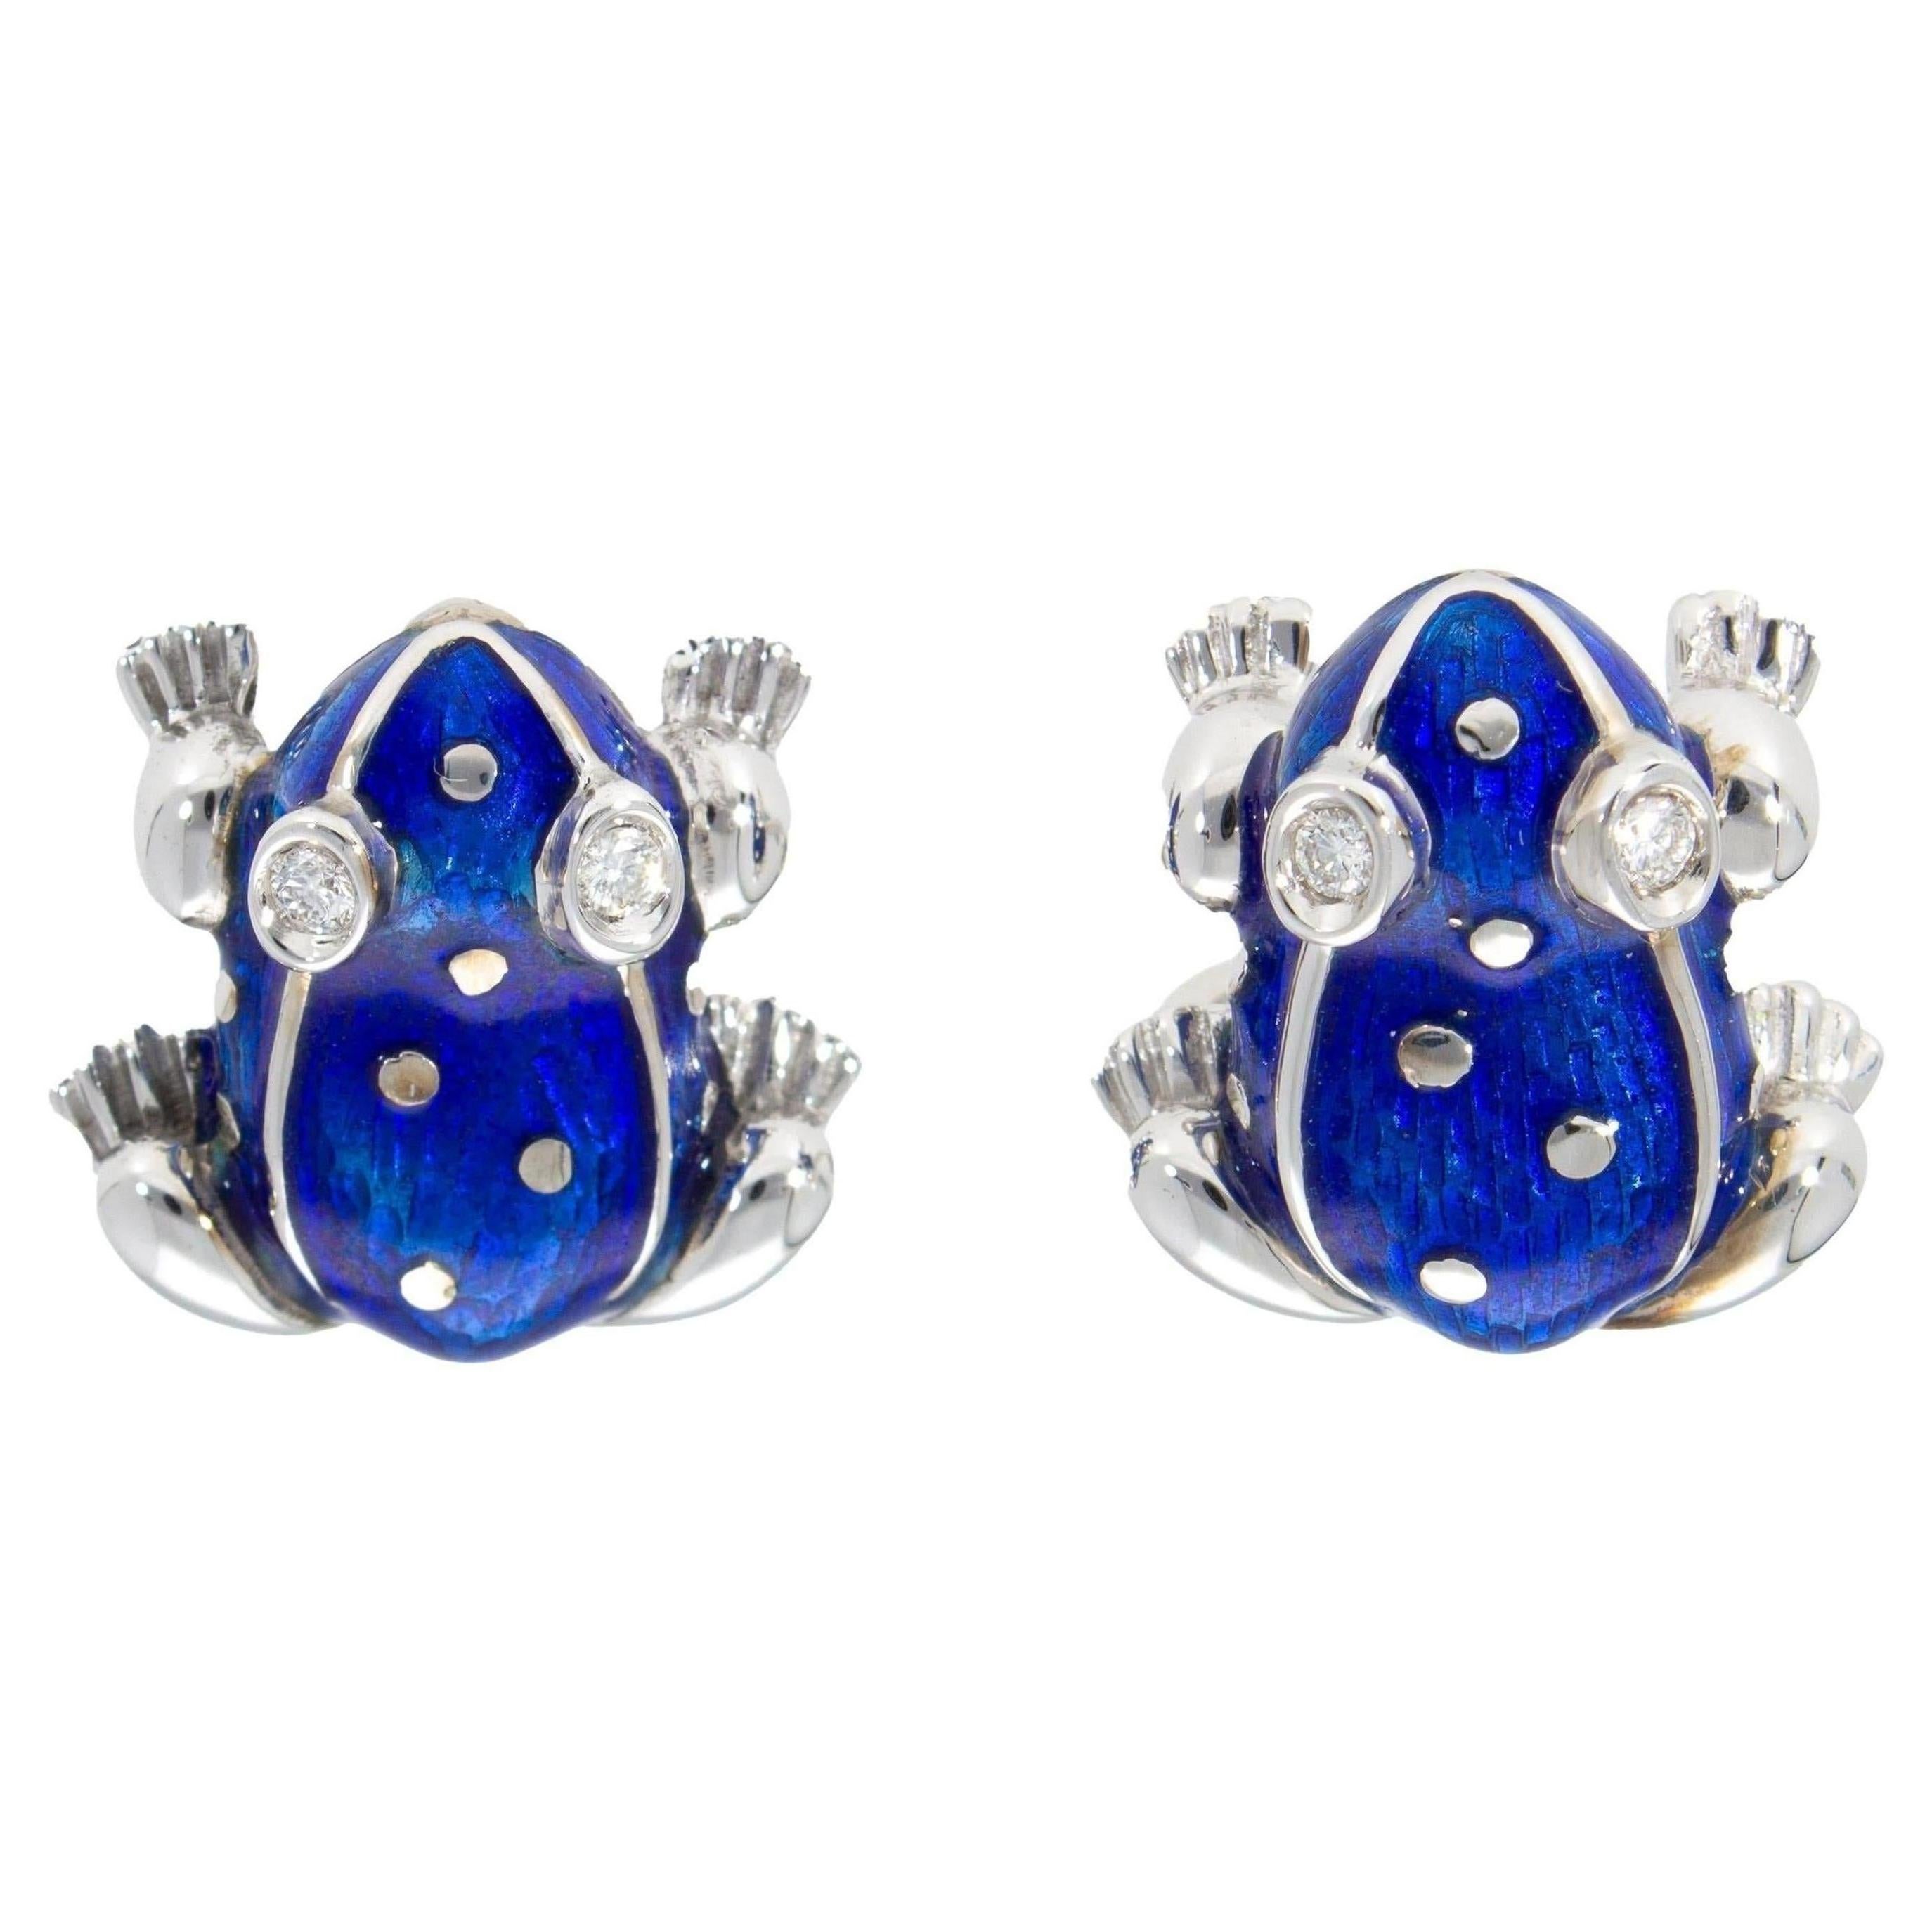 18 Kt White Gold with Blu Enamel Diamonds Frog Cufflinks Handcraft Made in Italy For Sale